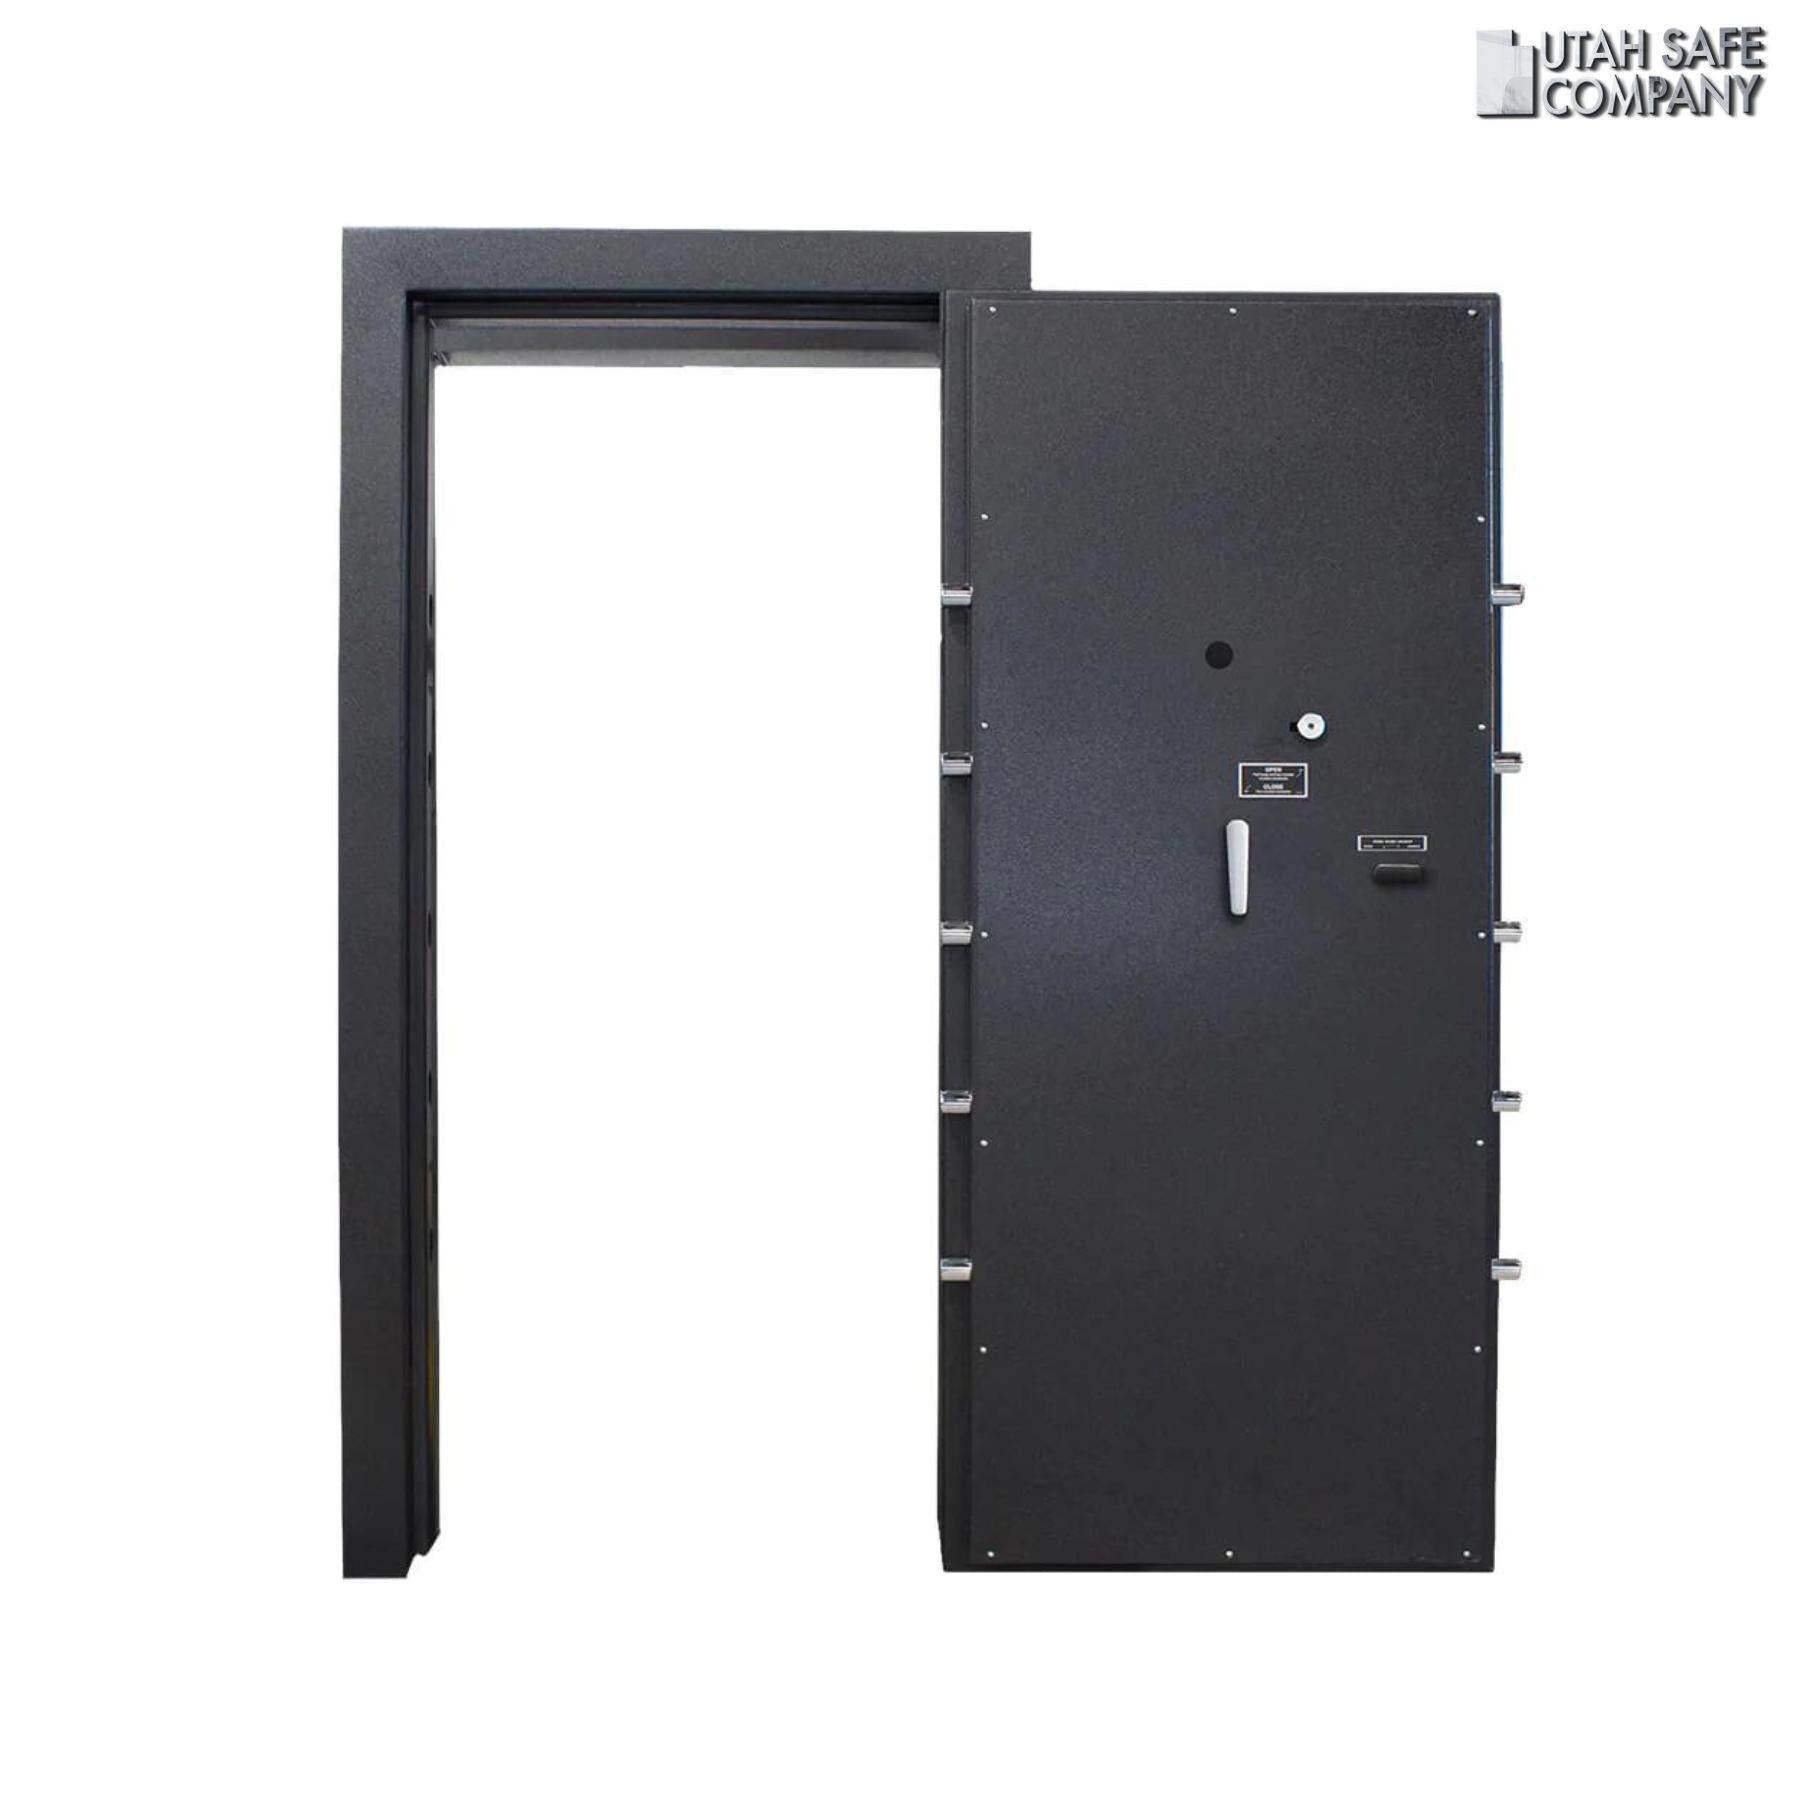 American Security 8030BFQ Out Swing Vault Door - Utah Safe Company